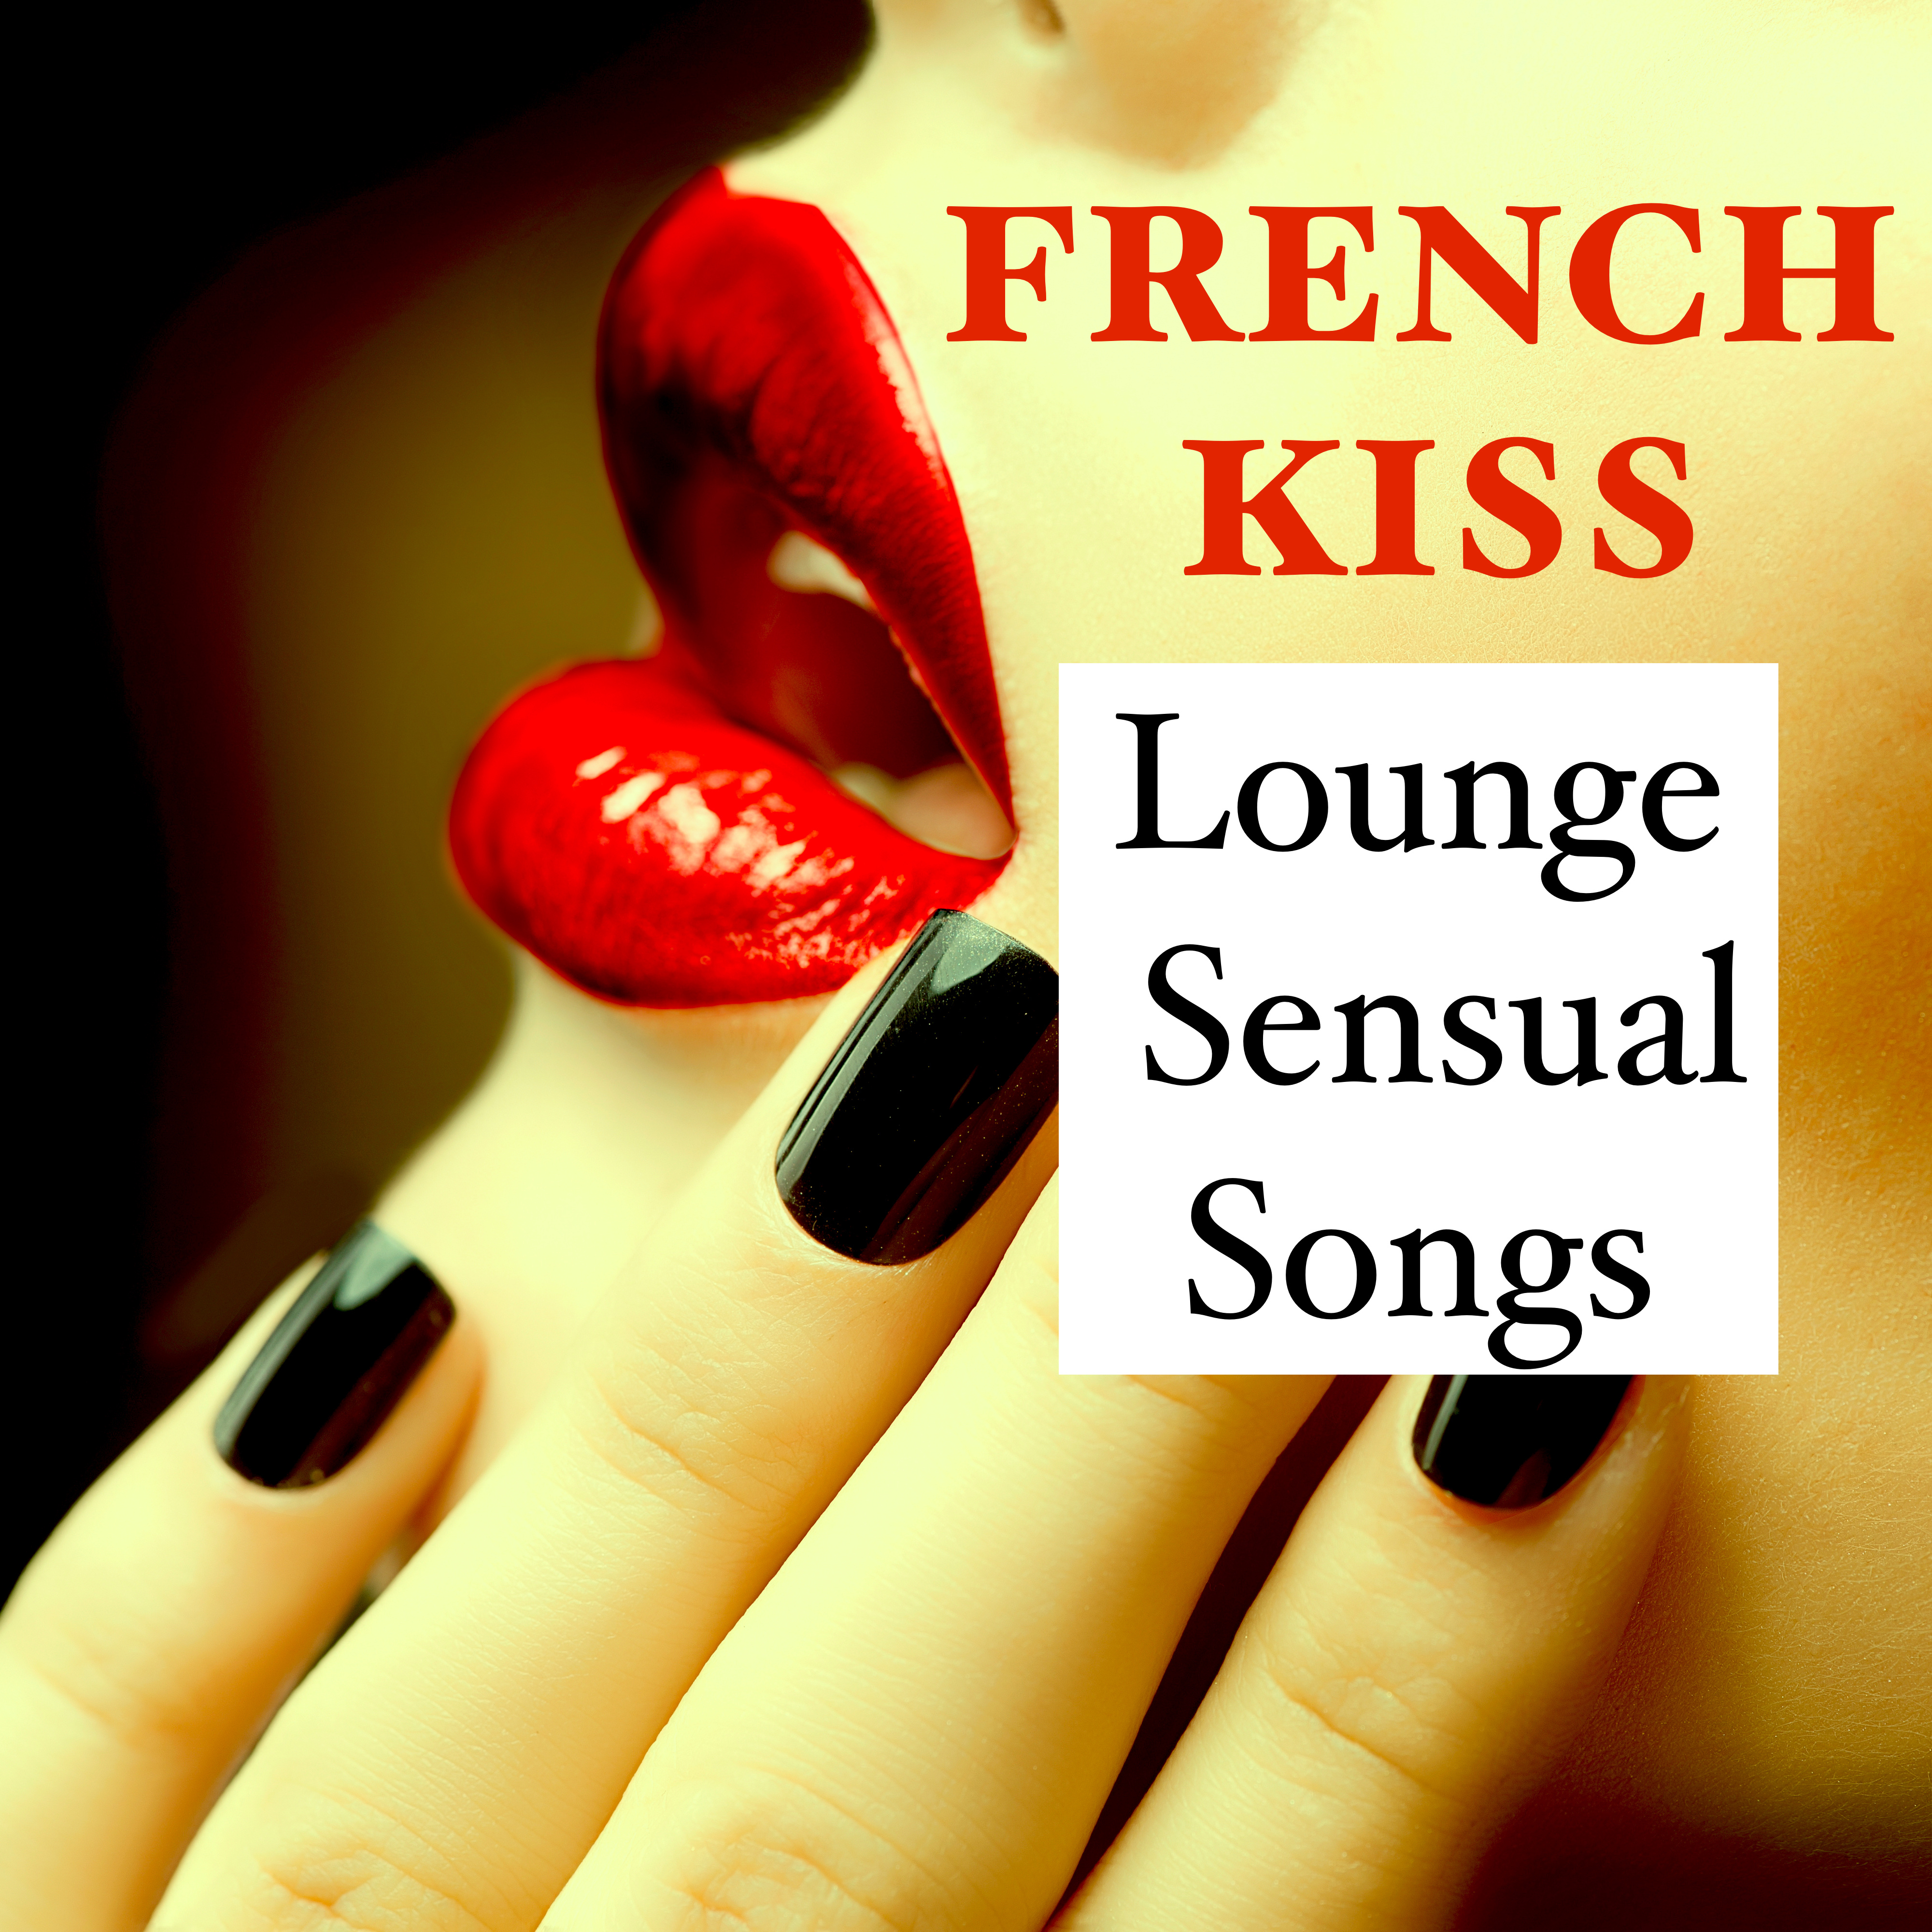 French Kiss – Lounge Sensual Songs for Romantic Amazing First Kiss on Valentine's Day